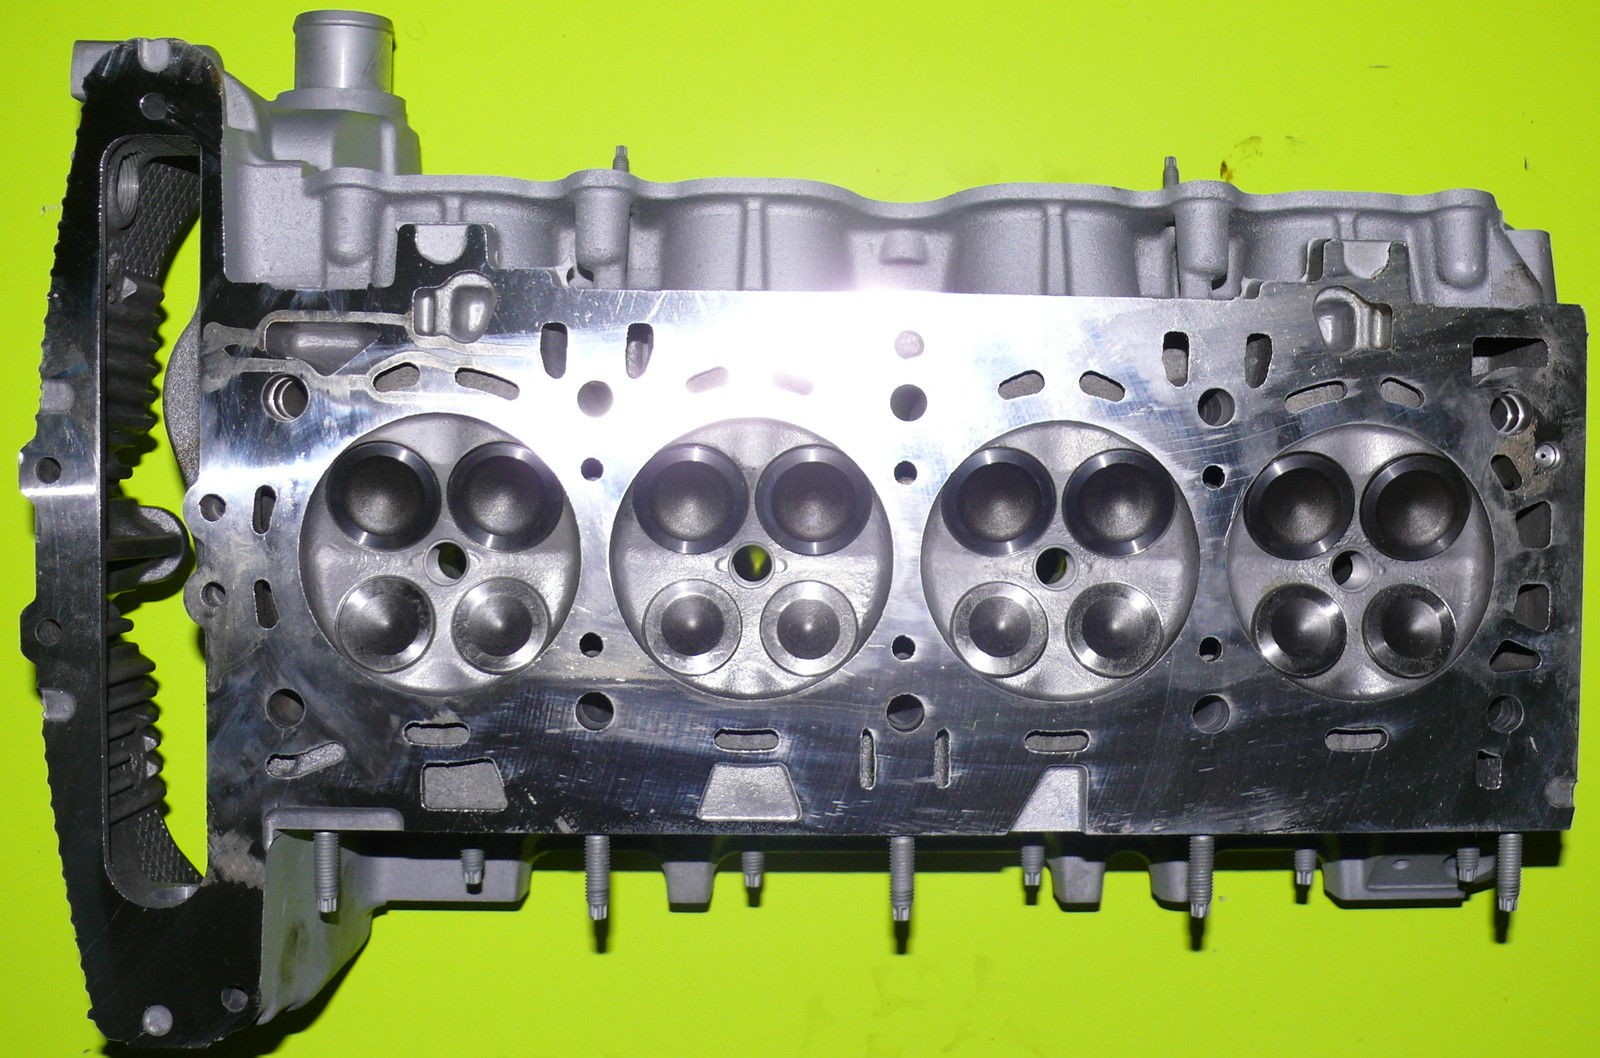 Motor Parts for 2.4 Ecotec Gm Chevy G6 2 2 2 4 Dohc Ecotec Cylinder Head Of Motor Parts for 2.4 Ecotec